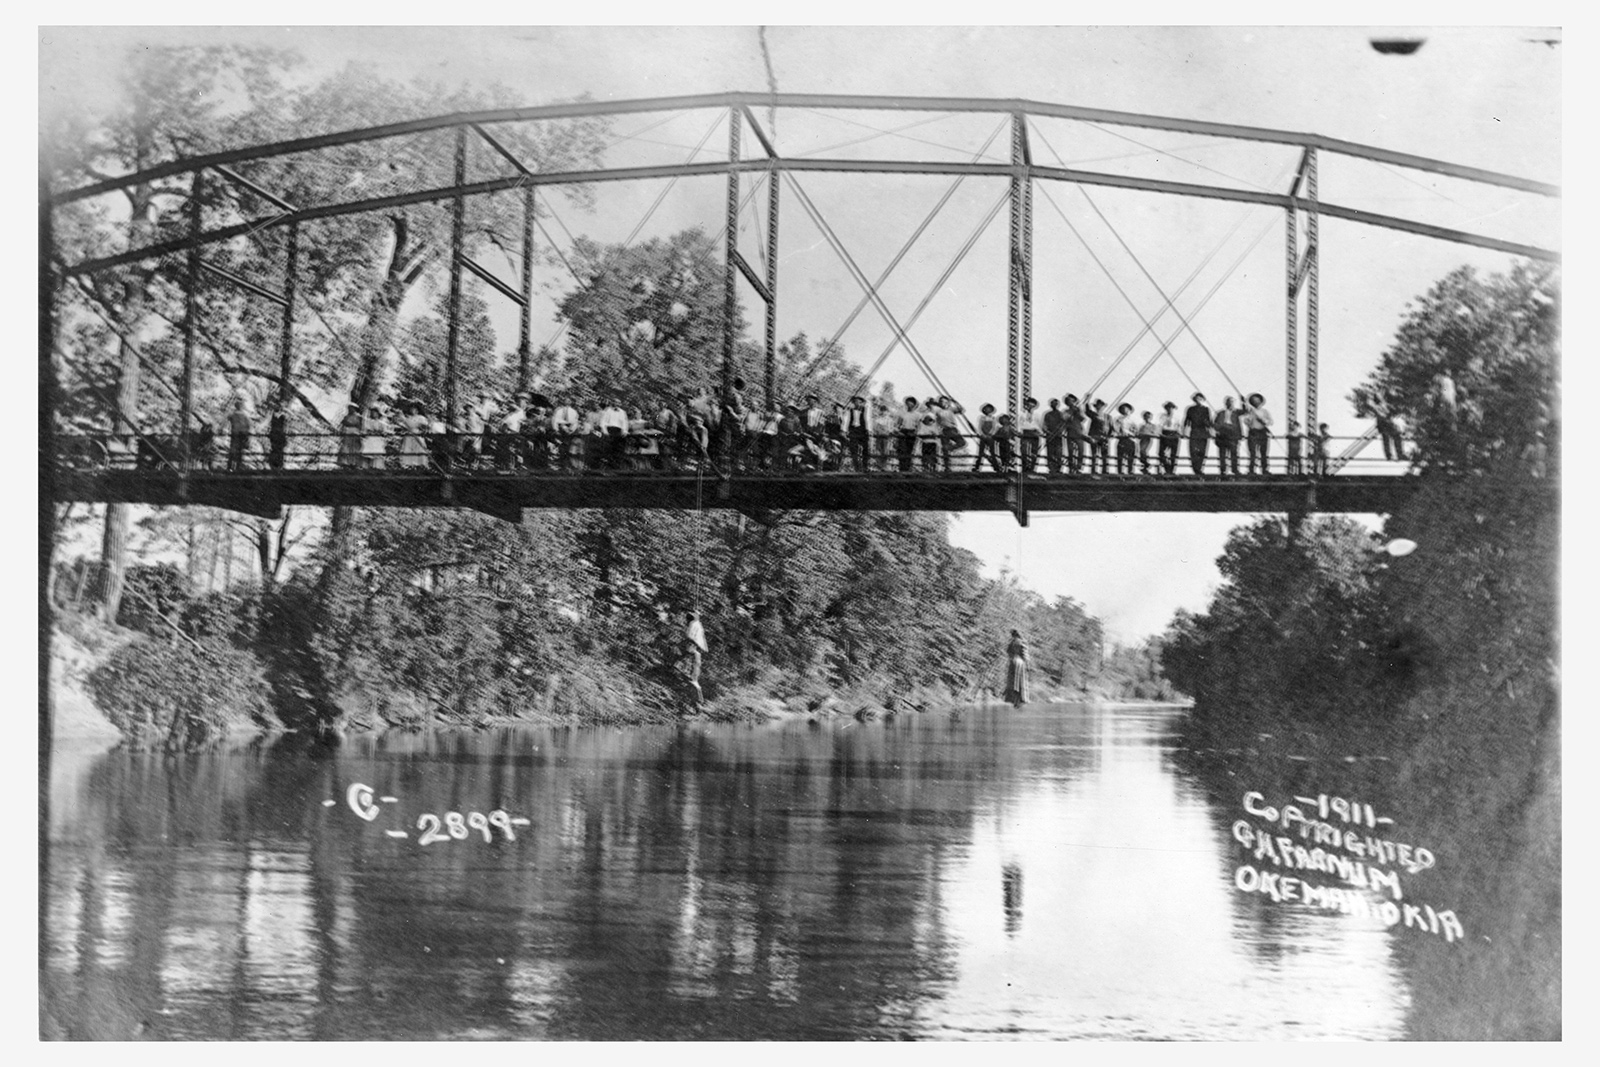 A photograph of a crowd of people standing on a bridge, from which two dead black people are dangling.